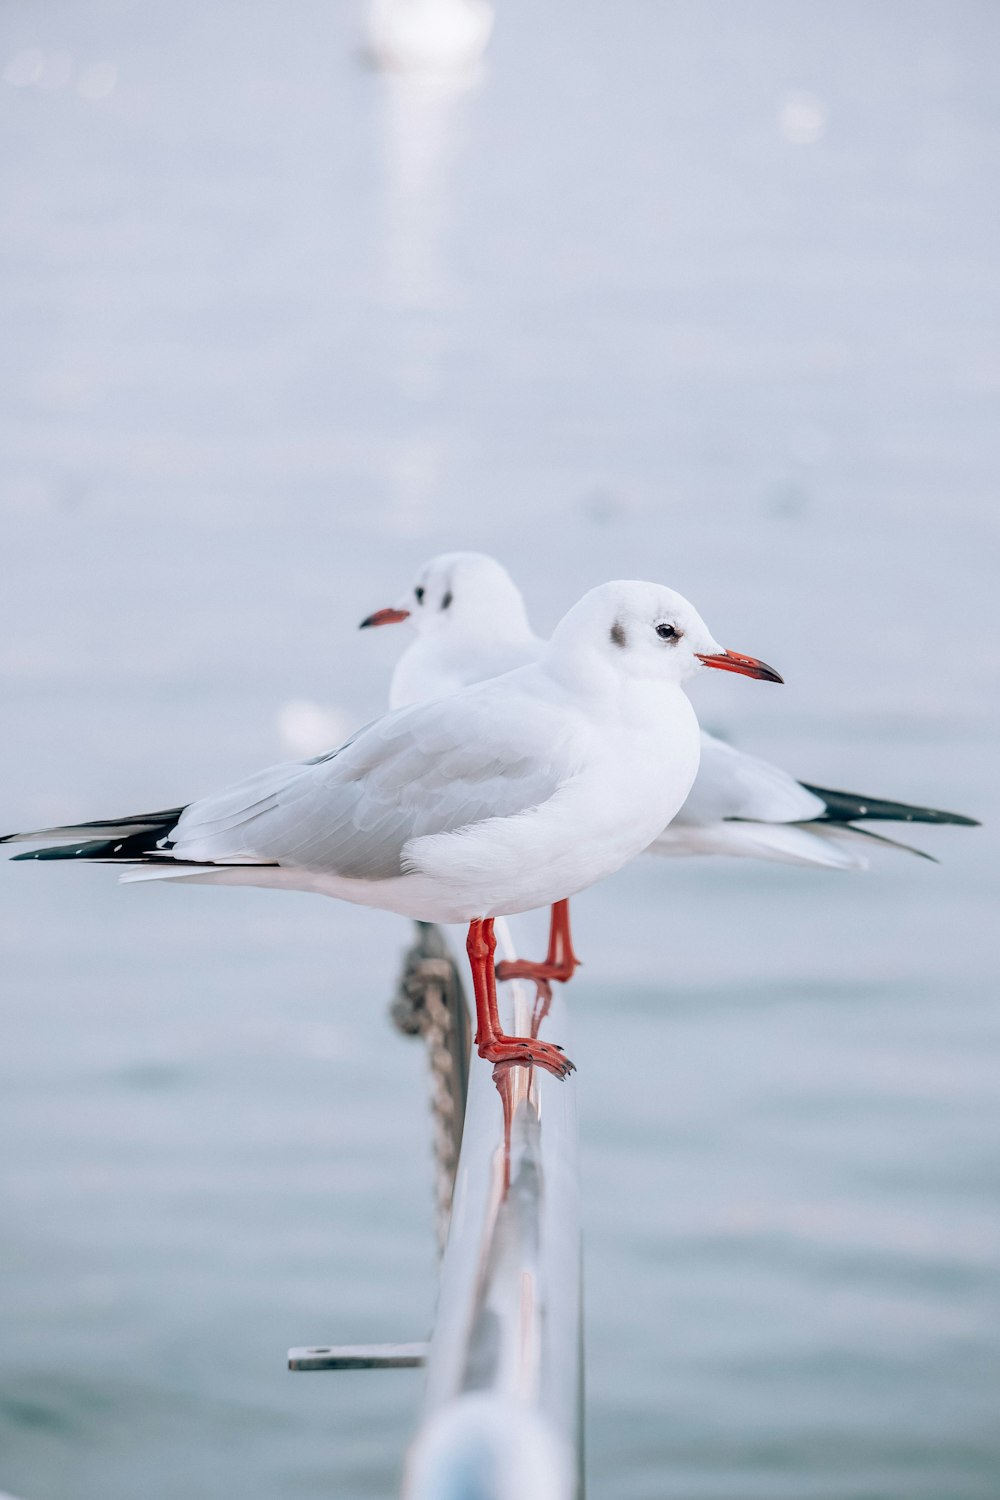 two seagulls are standing on a pole near the water